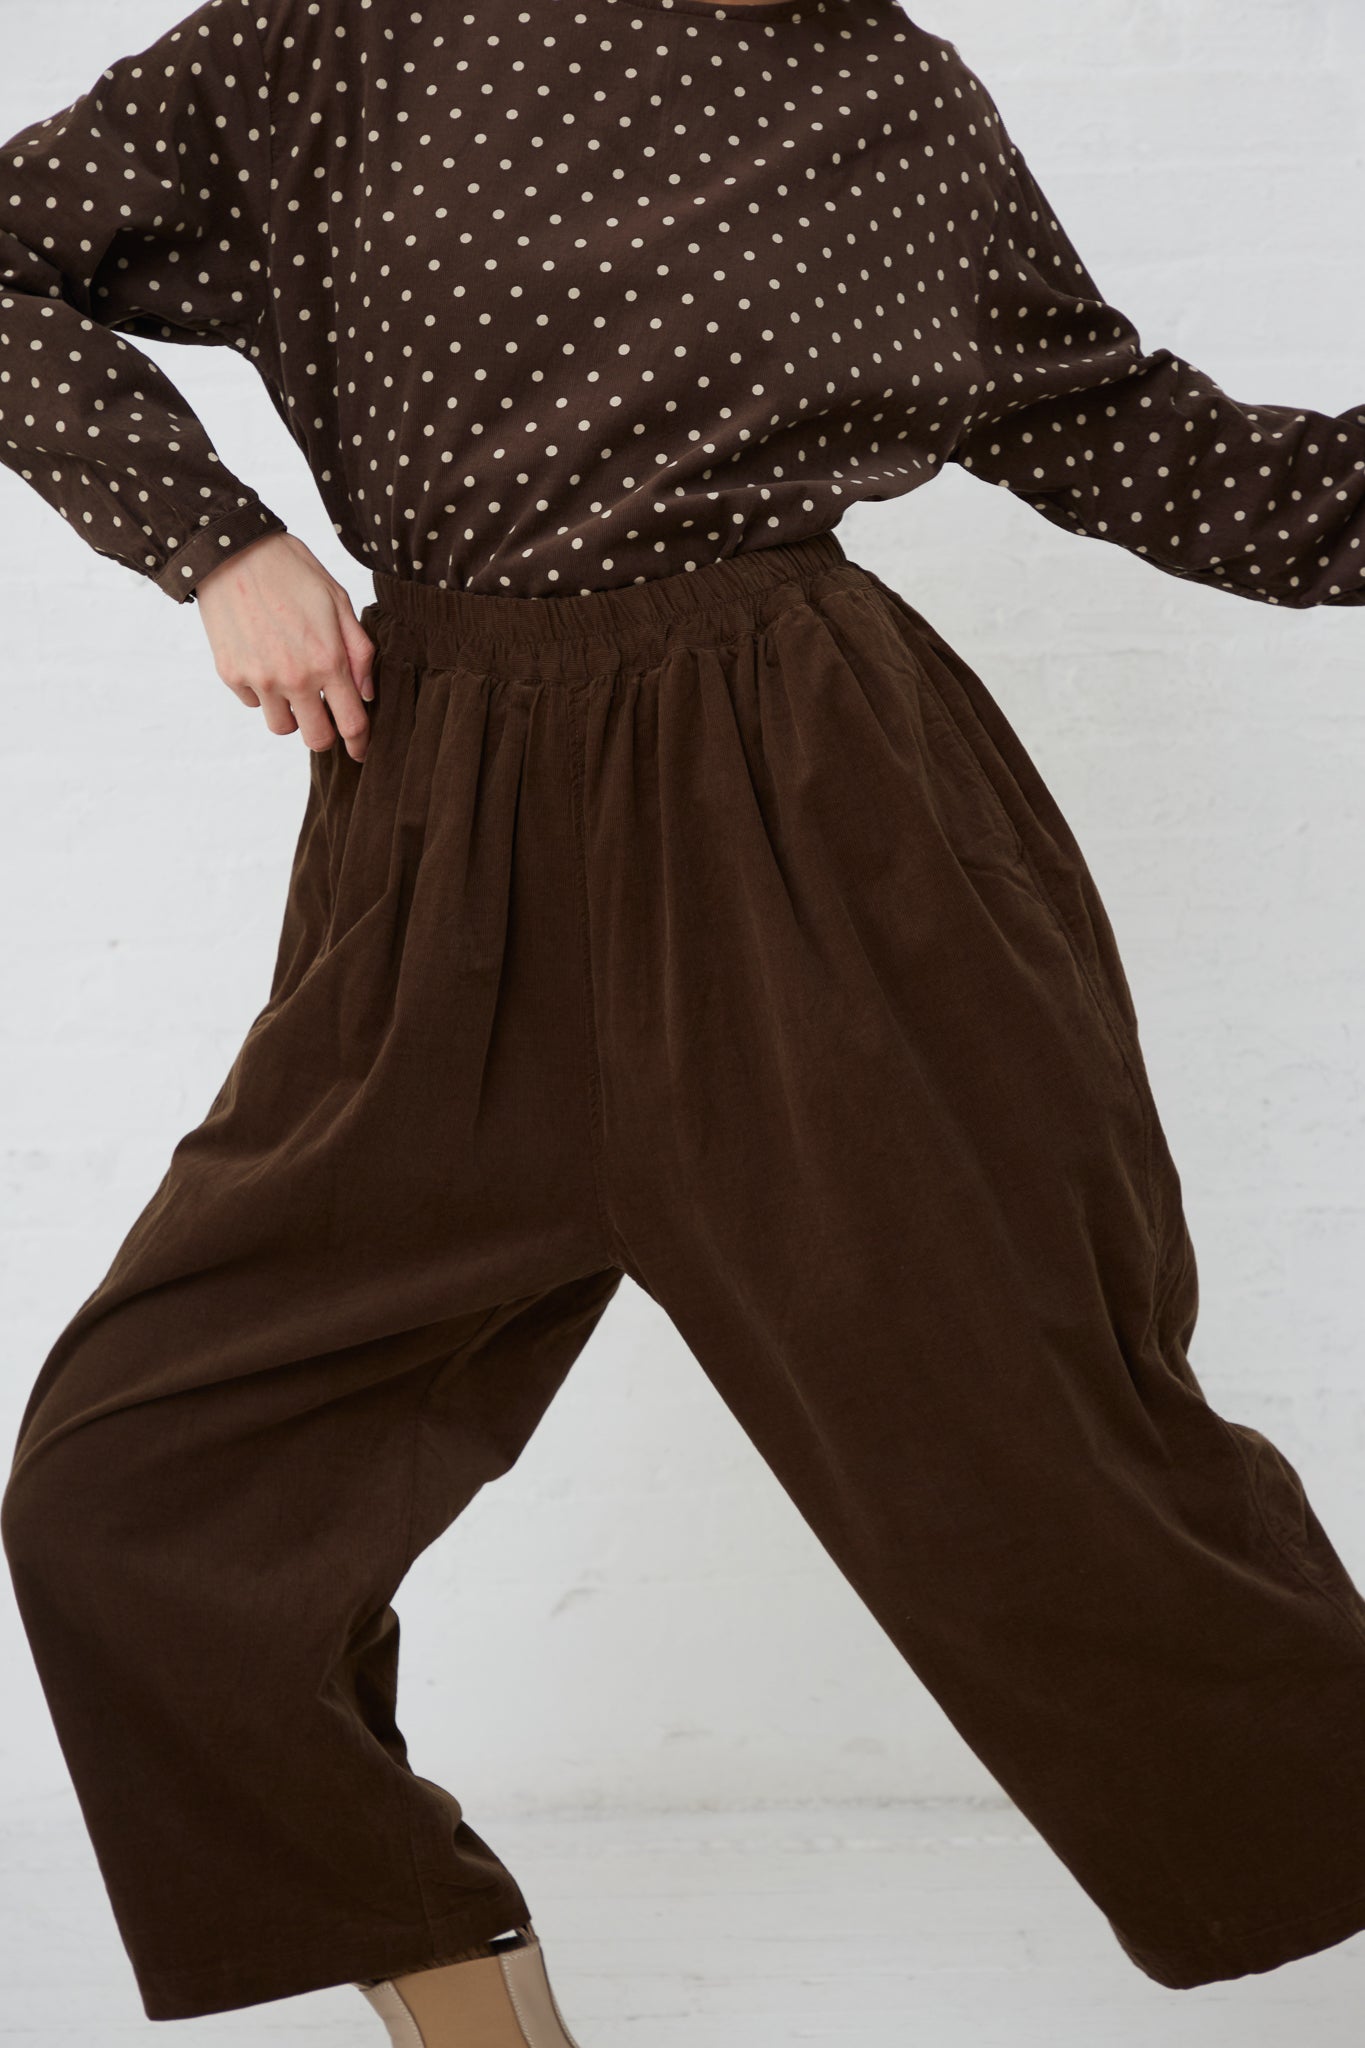 A woman wearing a relaxed fit Ichi polka dot top and brown pants.